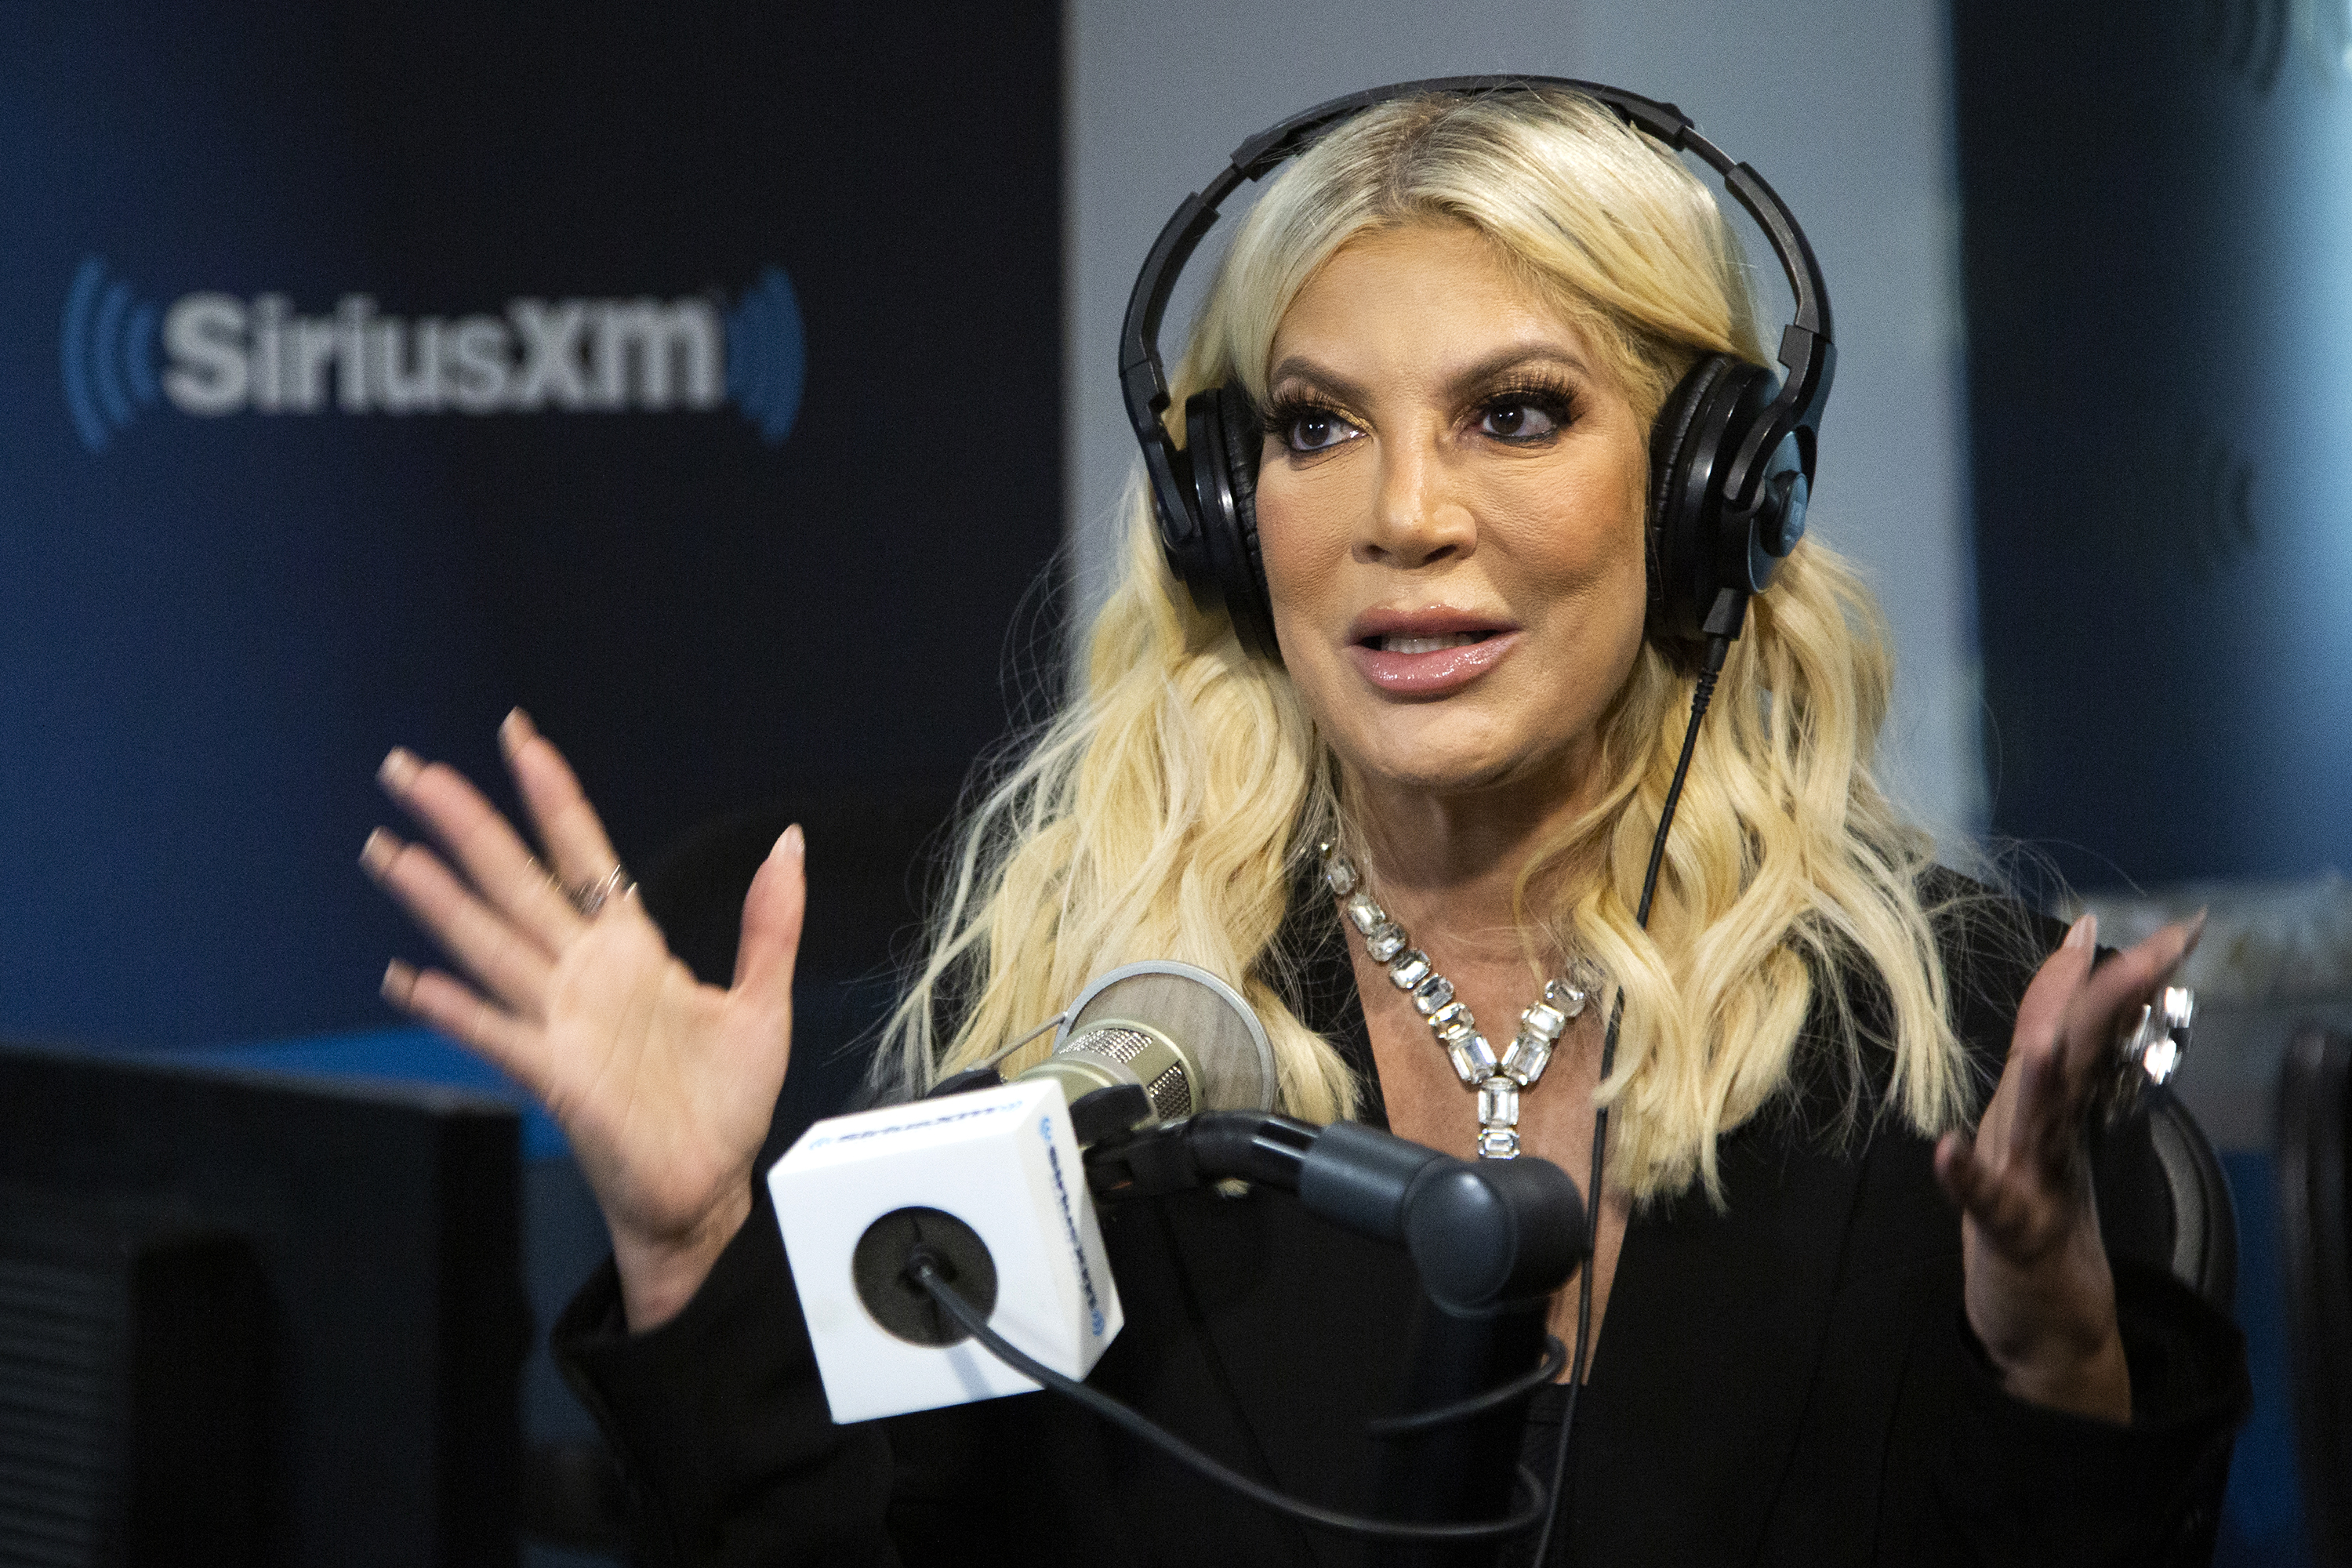 Tori Spelling visits SiriusXM Studios on October 7, 2022 in New York City | Source: Getty Images